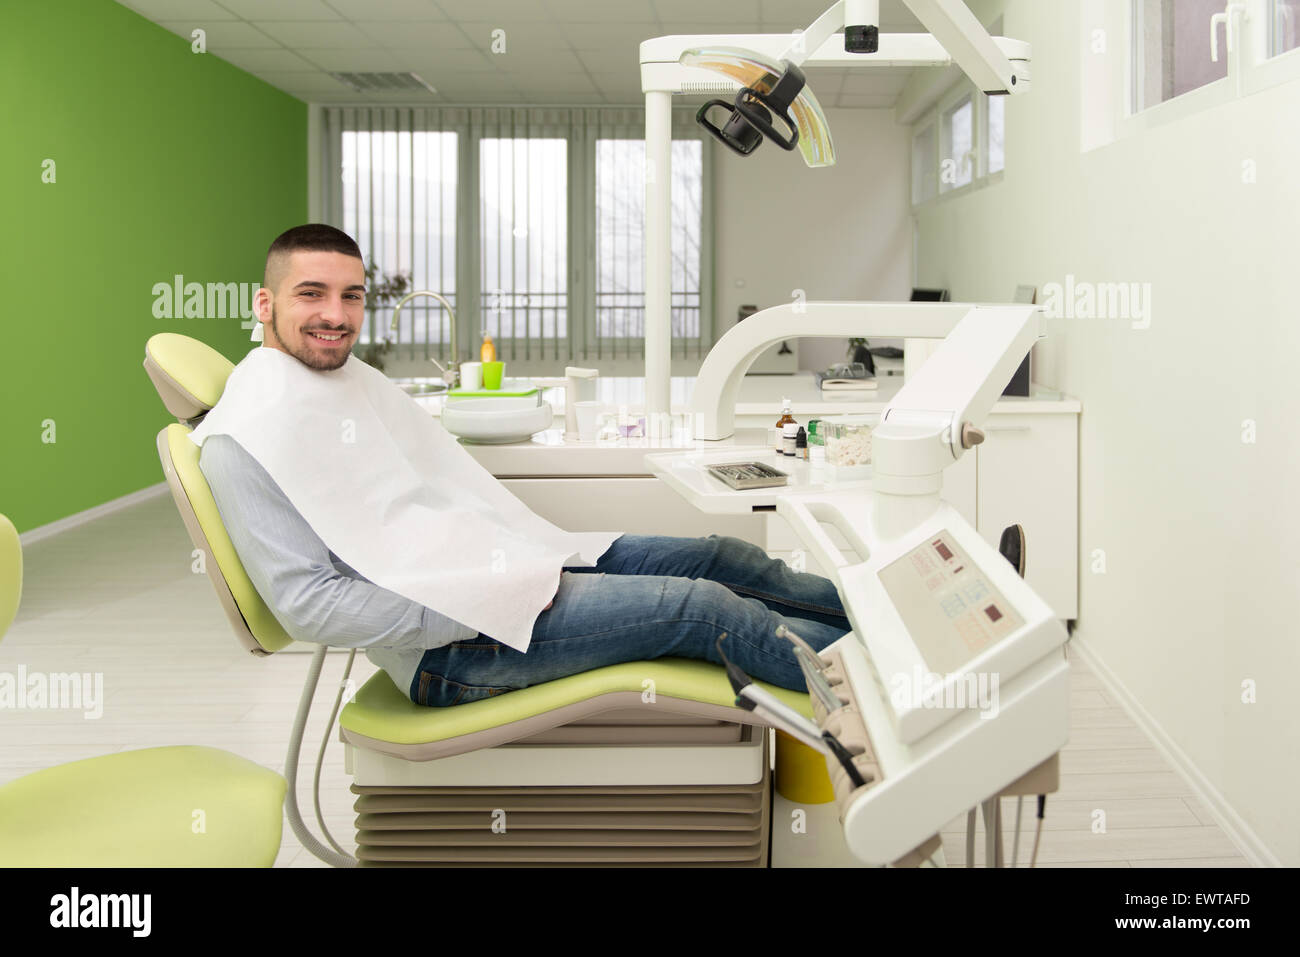 Young Man Waiting For A Dental Exam Stock Photo